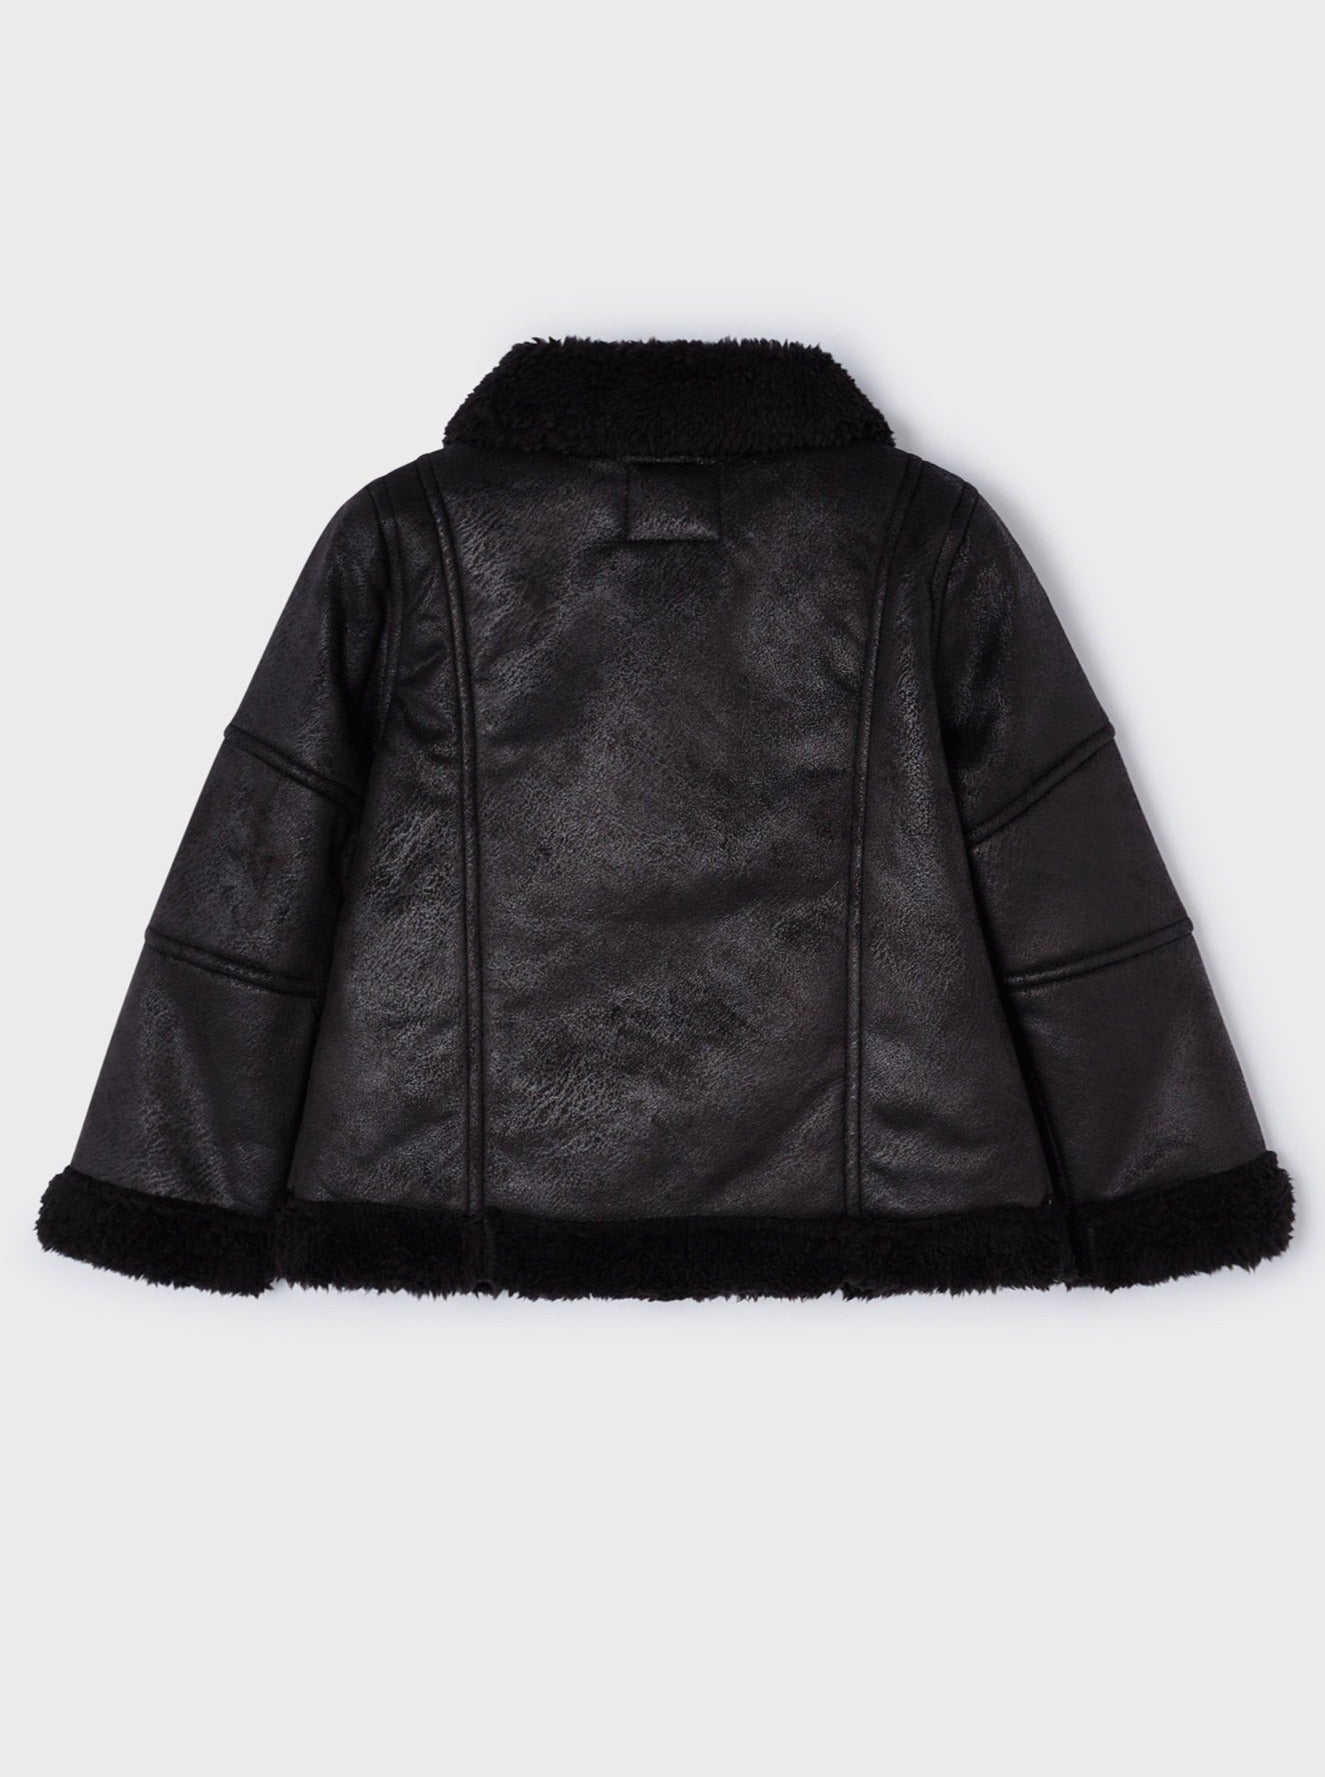 Mayoral Mini Black Shearling Collar Faux Suede Jacket _4414-85